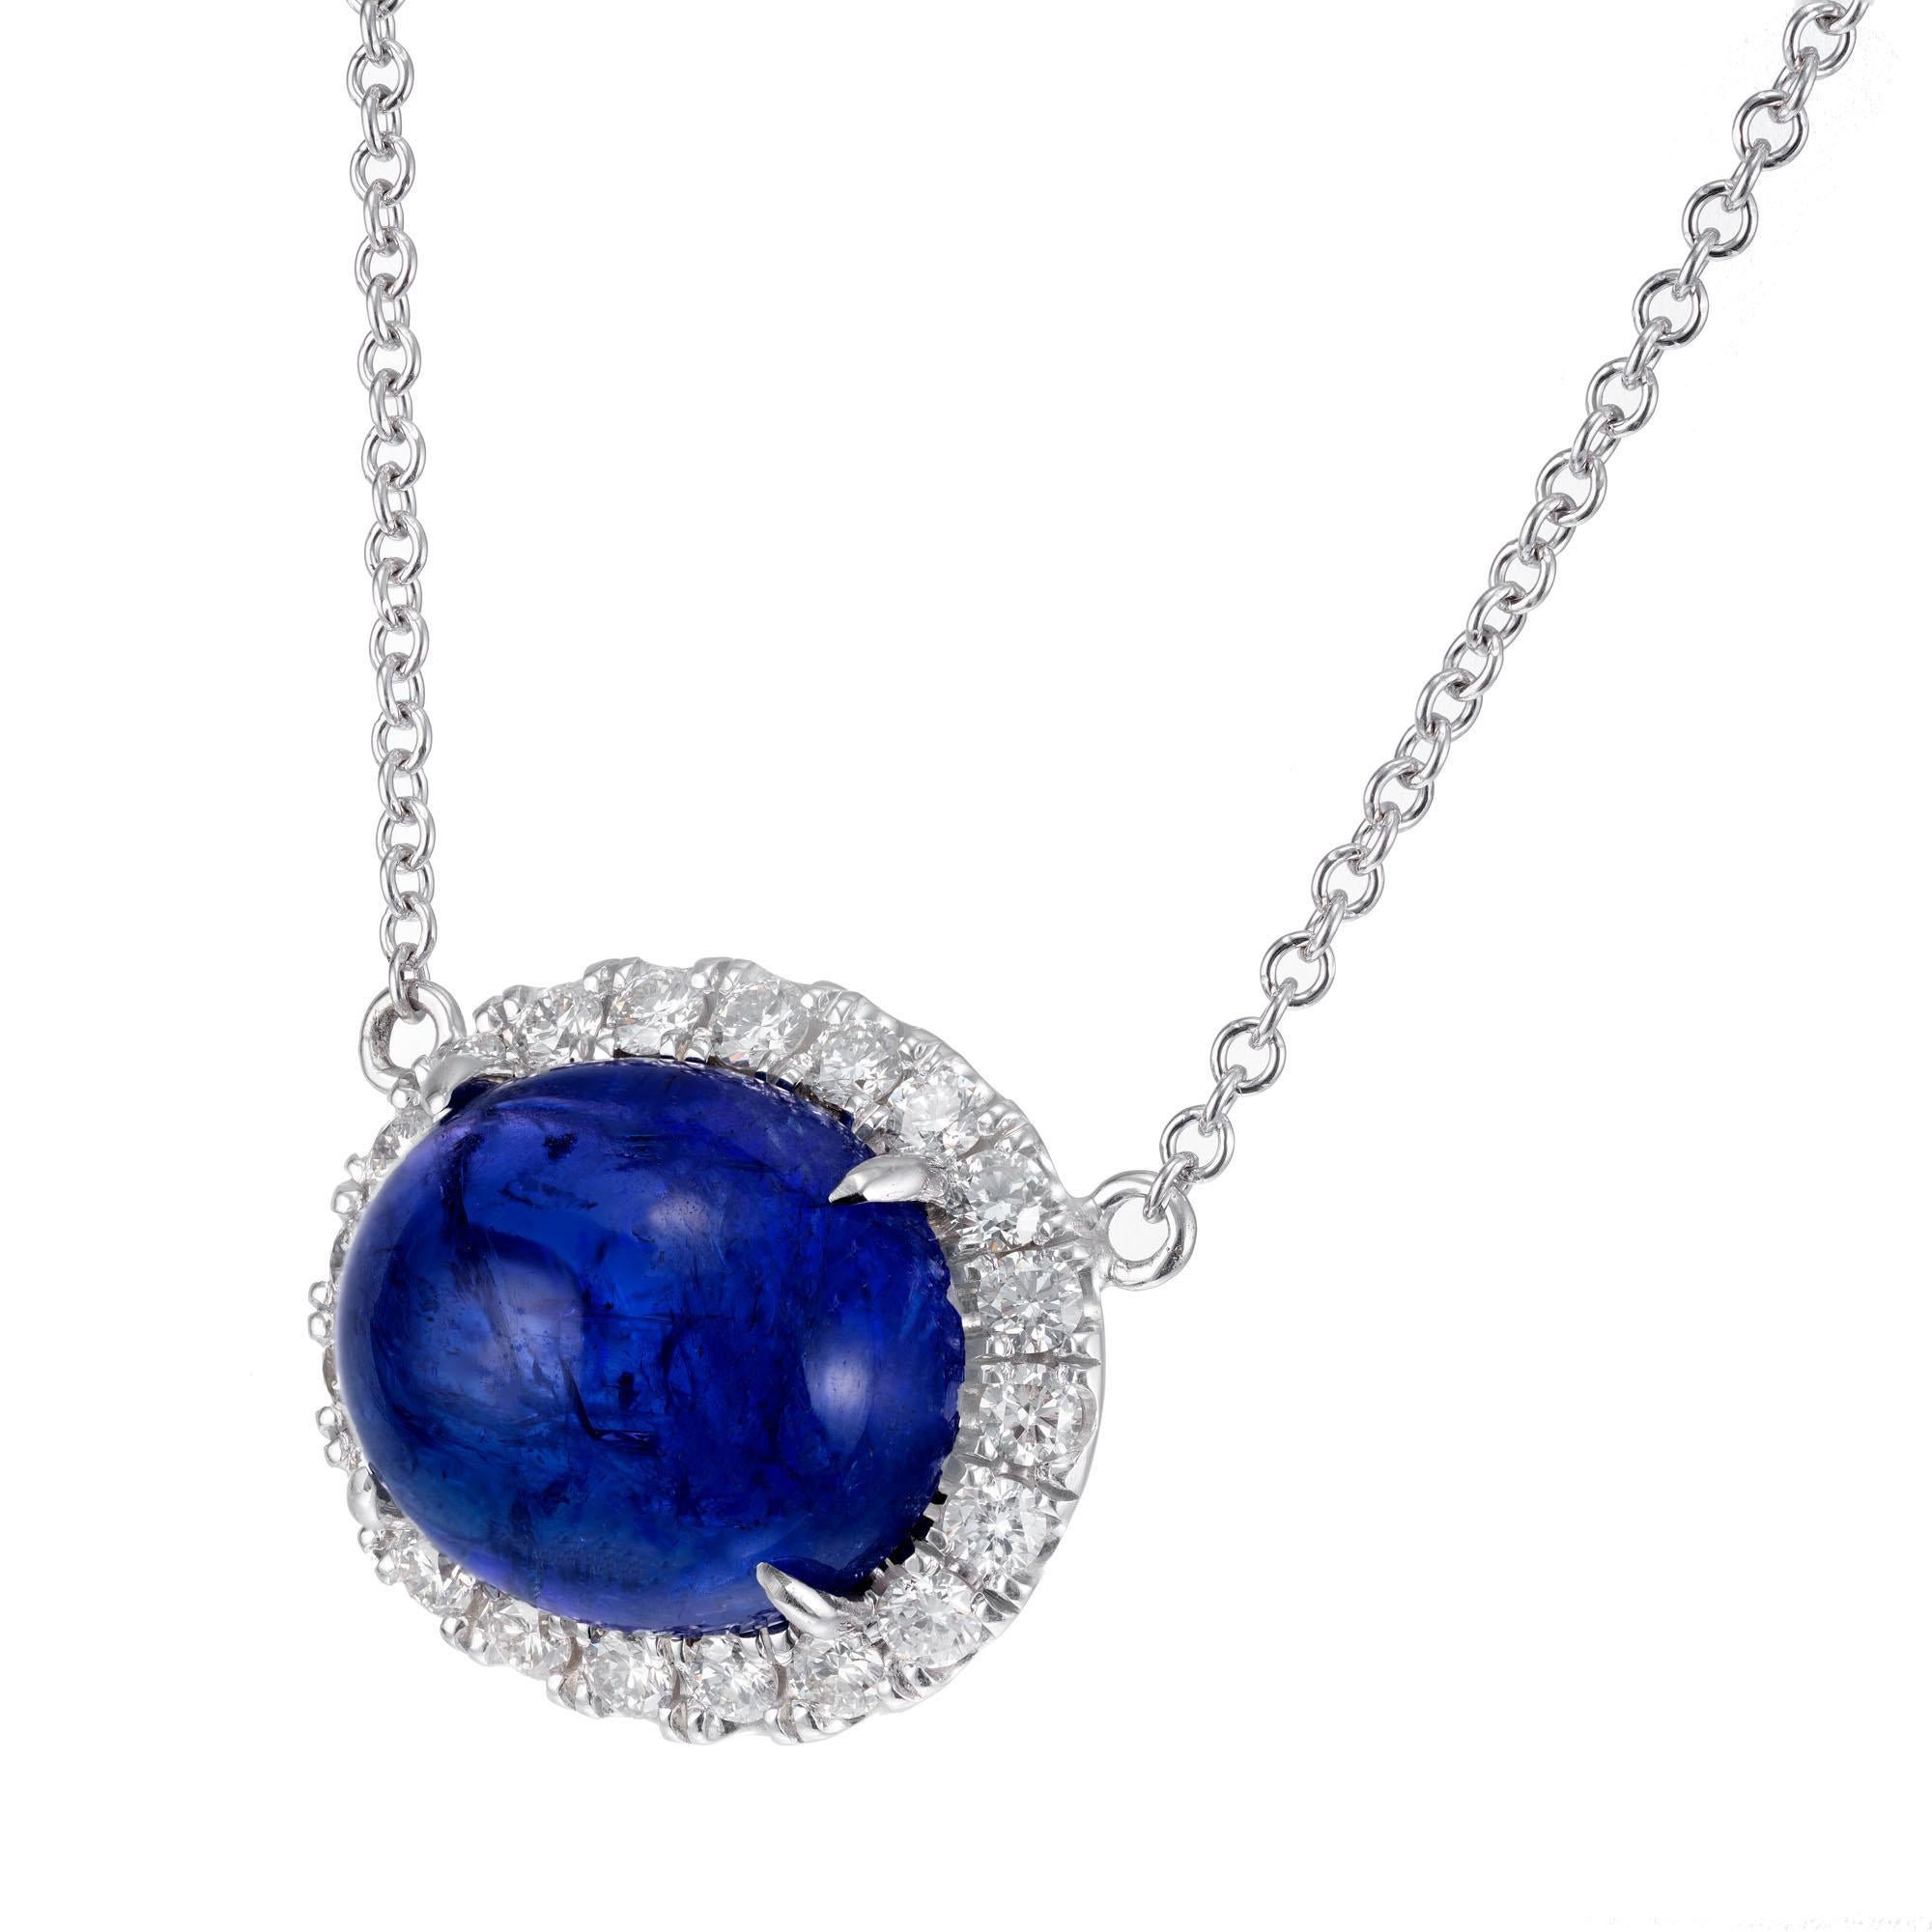 Vivid blue earth mined tanzanite and diamond pendant necklace. 8.00 carat oval cabochon center stone with blue and purple overtones surrounded a brilliant cut diamond halo. 18 inch 18k white gold chain. Created in the Peter Suchy Workshop

1 oval